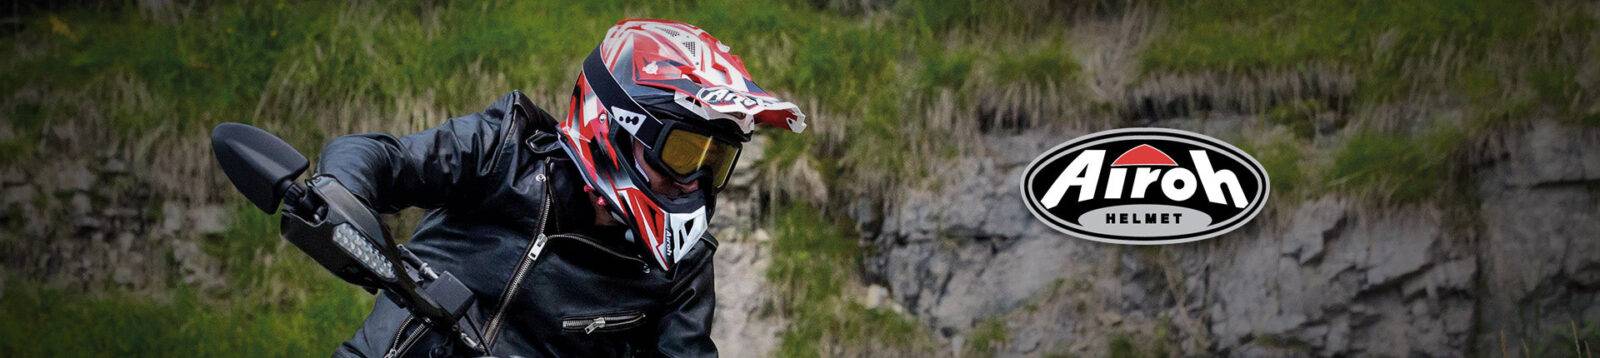 Airoh Motocross and Off-Road Helmets Review